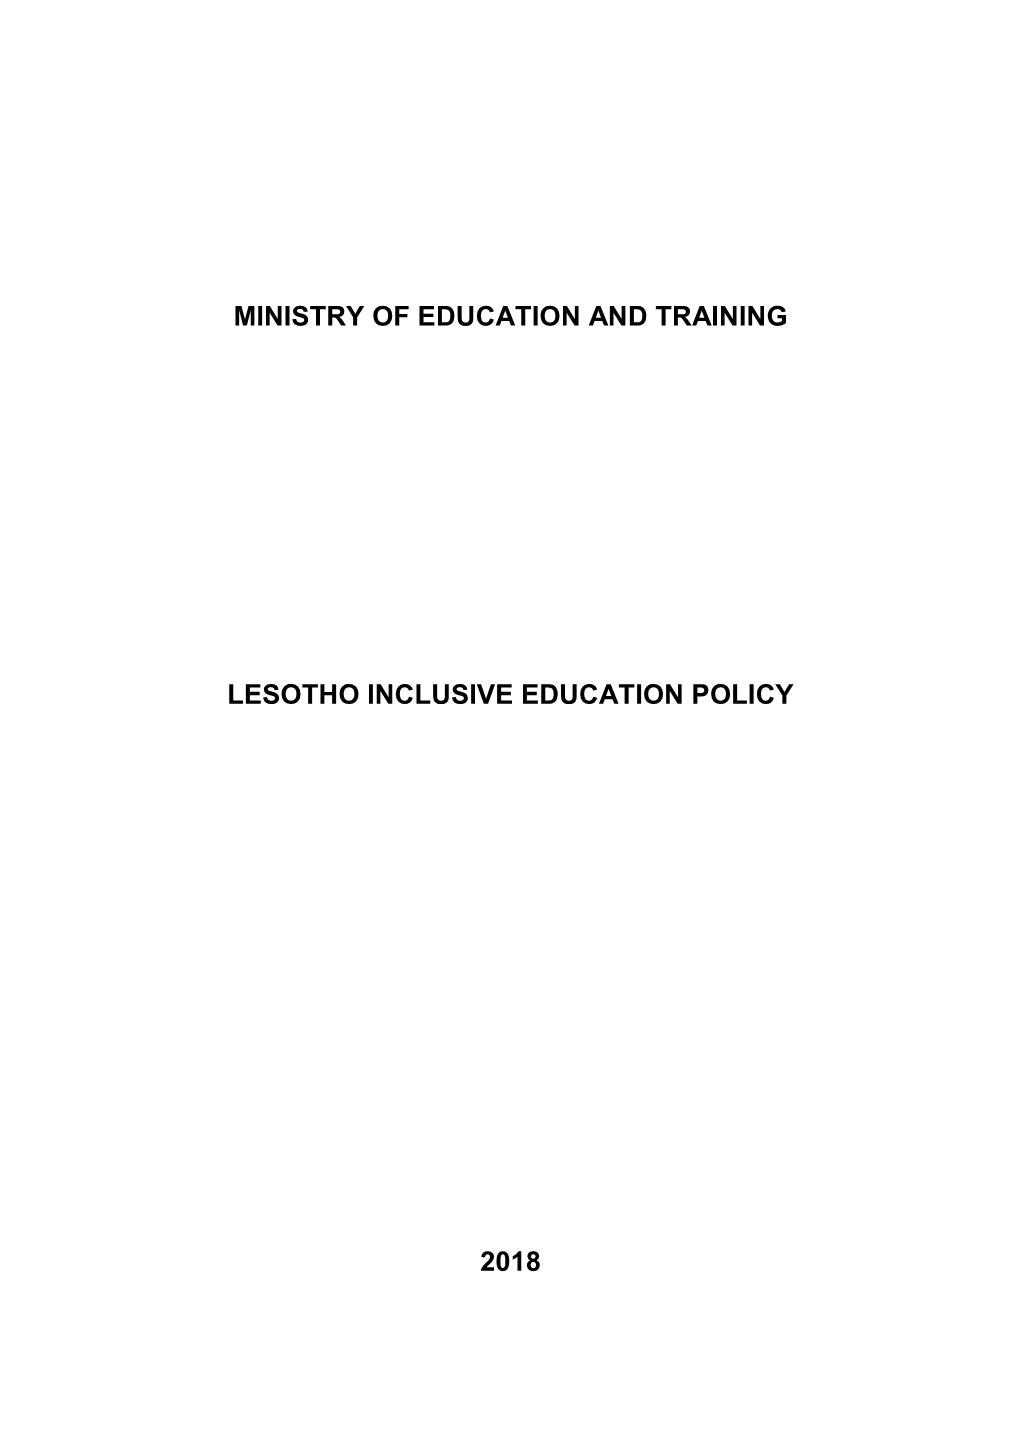 Ministry of Education and Training Lesotho Inclusive